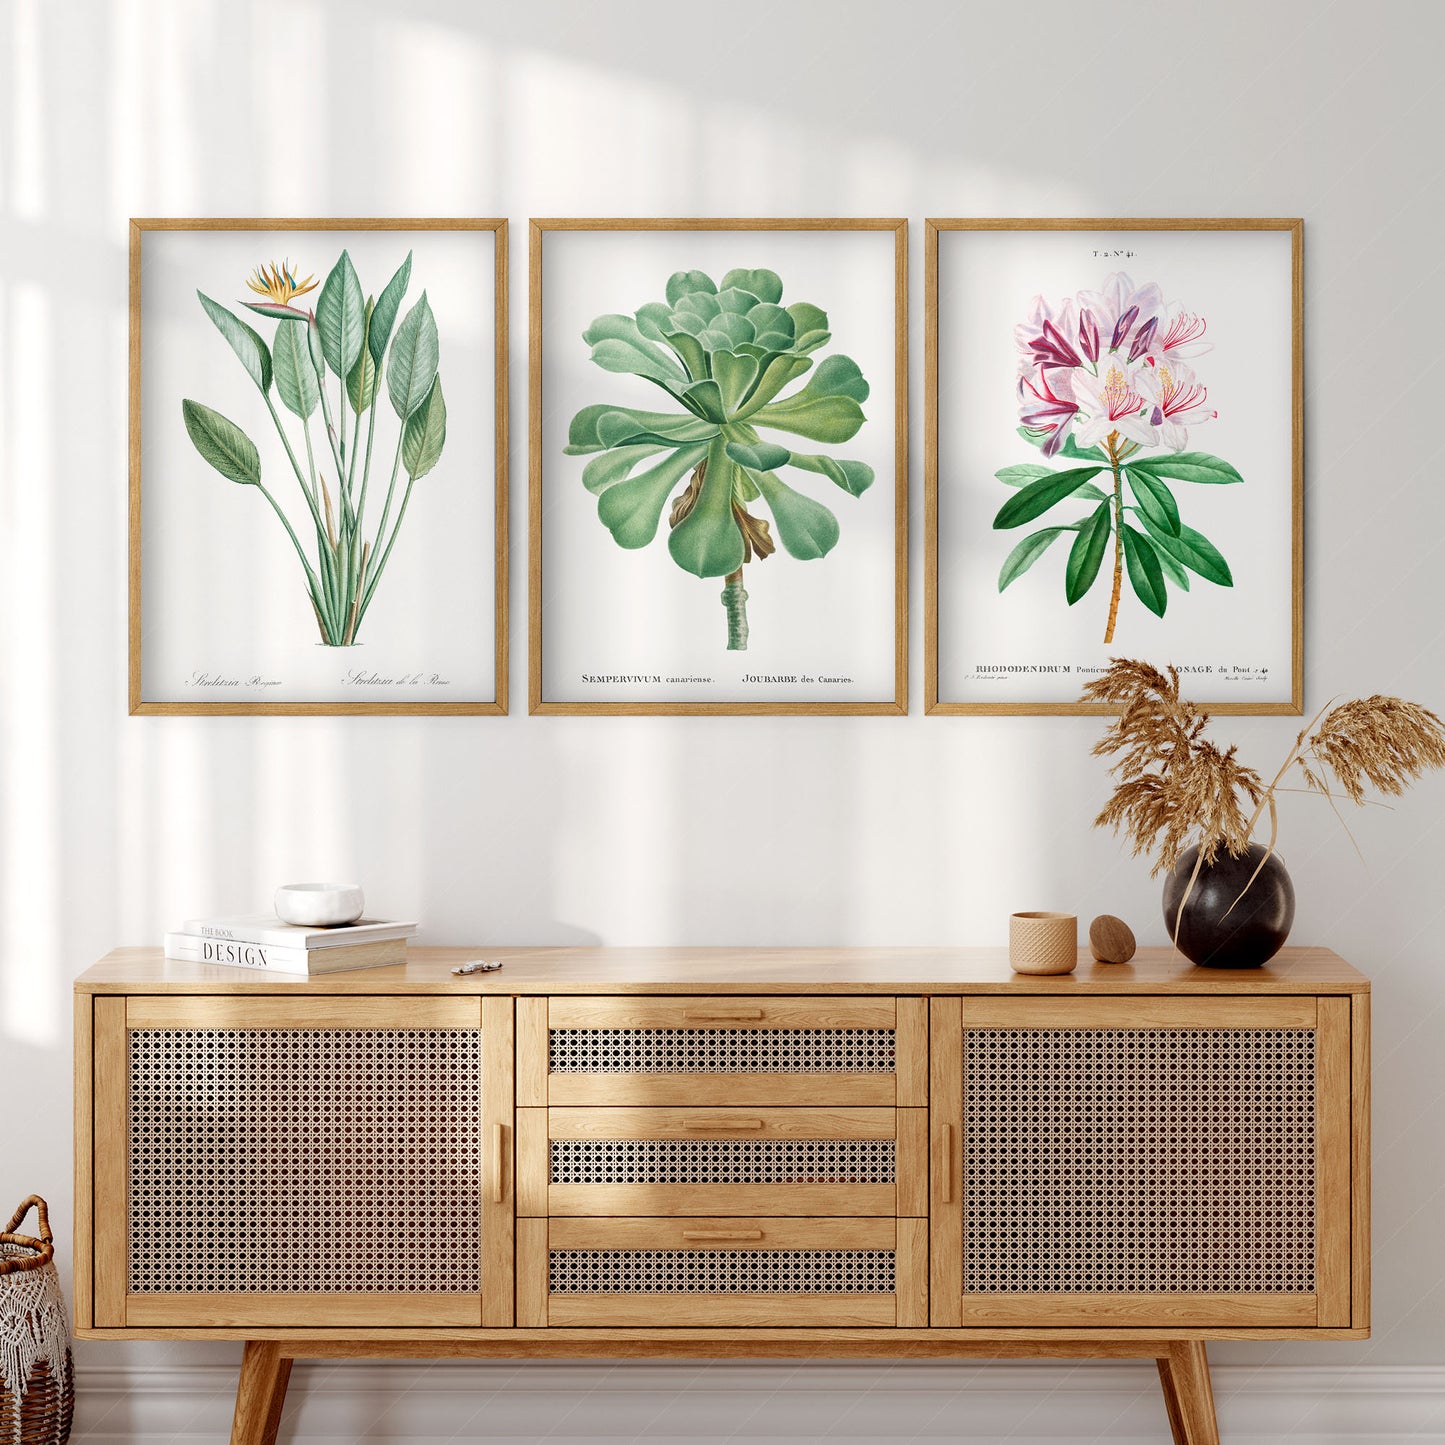 Botanical Gallery Wall Art, Set of 3 Prints, Antique Flowers Paintings 10